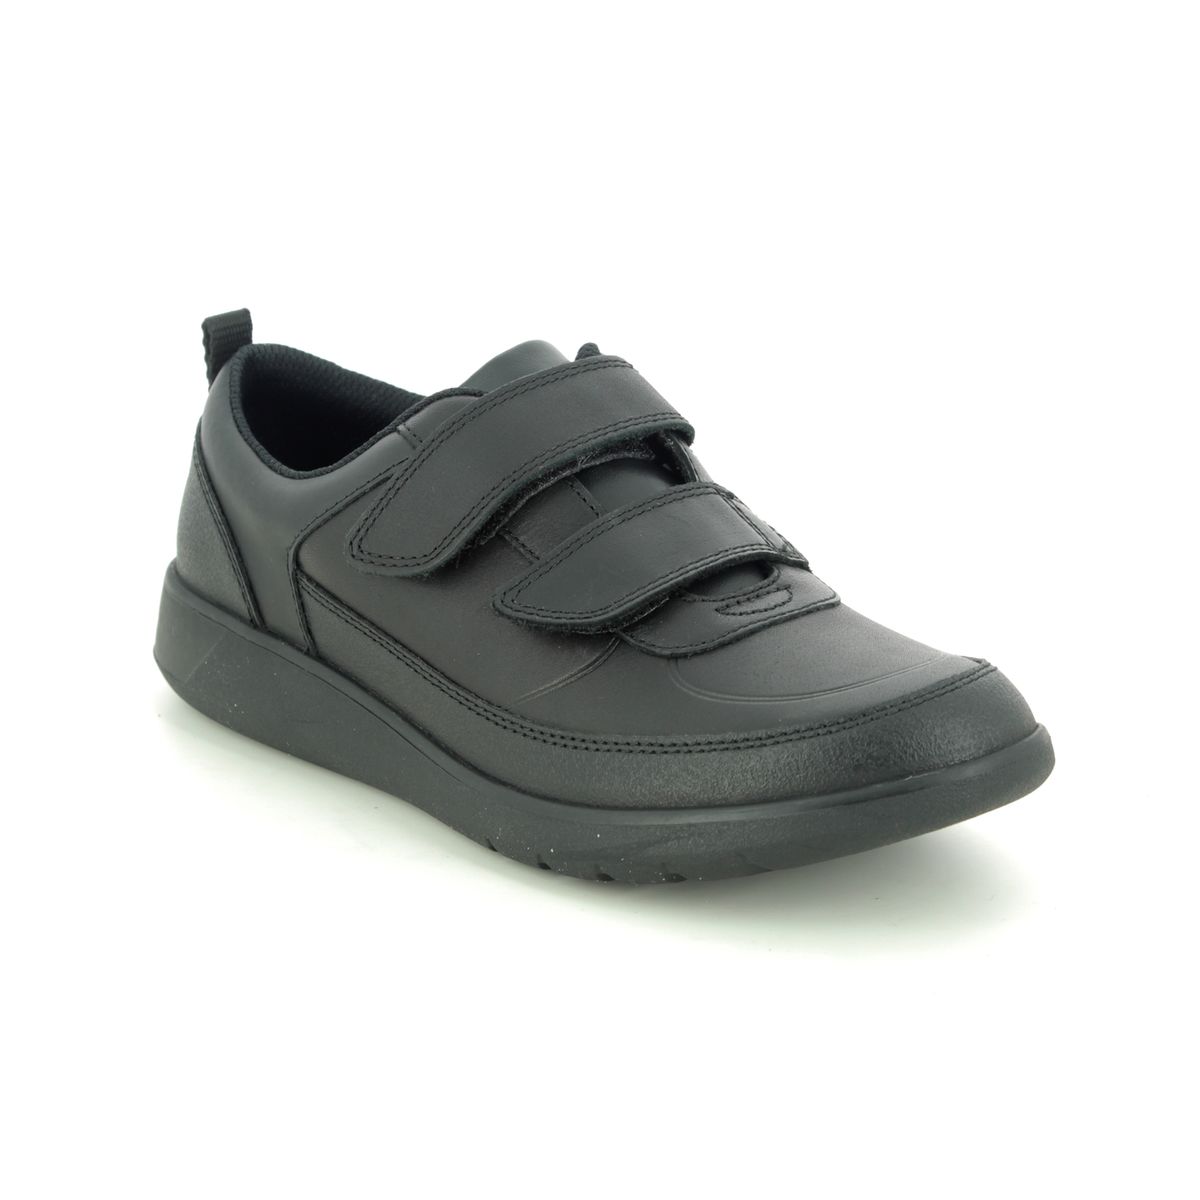 Clarks Scape Flare Y Black leather Kids Boys Shoes 4940-98H in a Plain Leather in Size 6